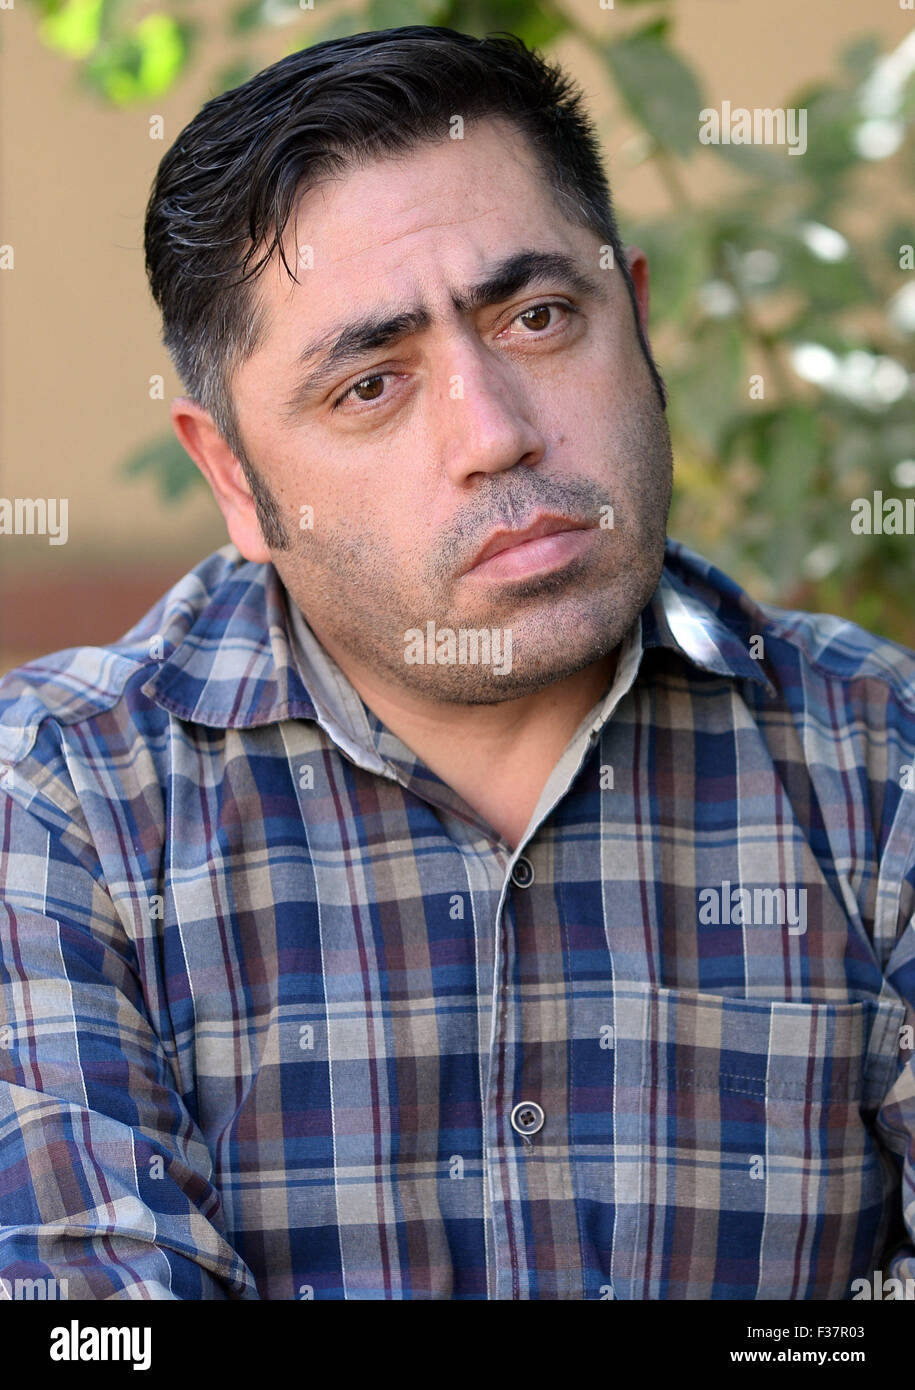 Kabul, Afghanistan. 26th Sep, 2015. Yasin Adel, former translator for the German armed forces Bundeswehr, explains his situation in Kabul, Afghanistan, 26 September 2015. Adel used to work as a translator for the German armed forces until autumn 2006. His application for asylum was rejected by German authorities. Photo: Subel Bhandari/dpa/Alamy Live News Stock Photo